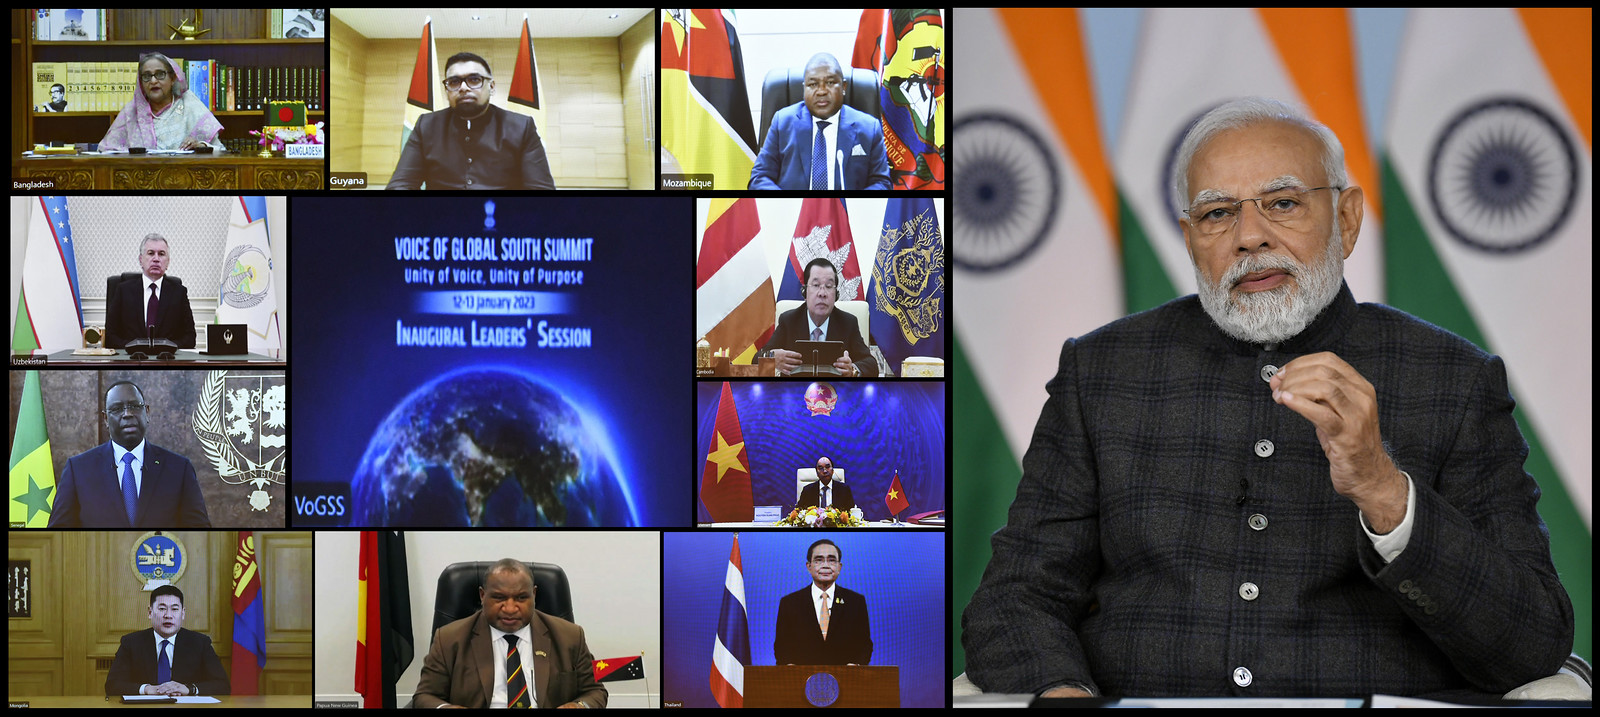 PM addresses Voice of Global South Summit